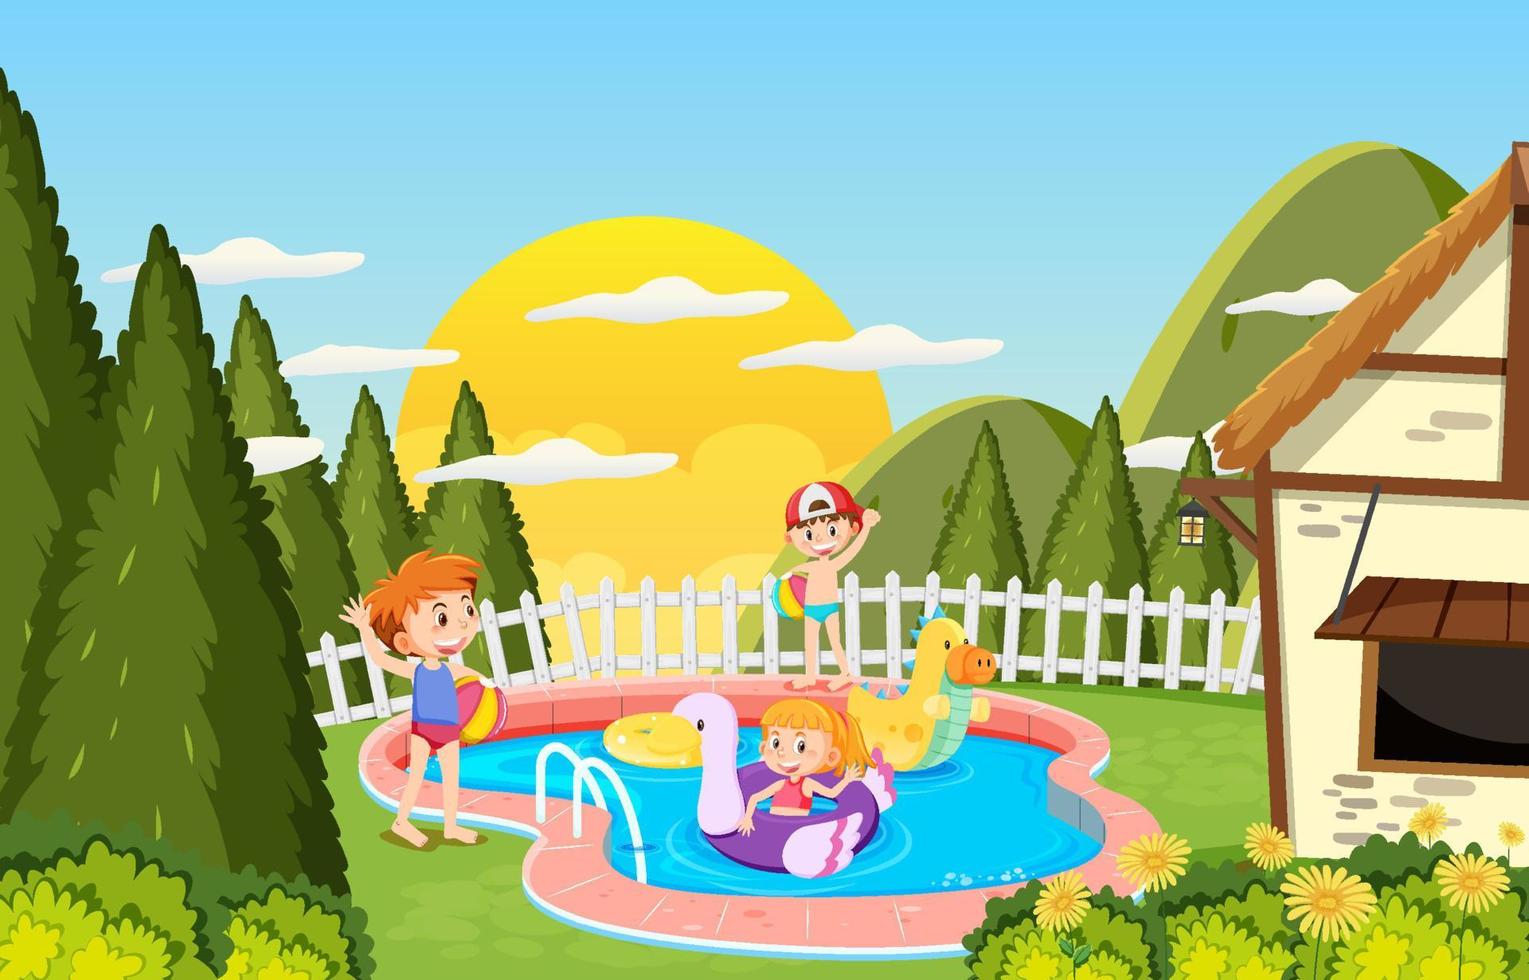 Children awimming at the pool at the back of the house vector